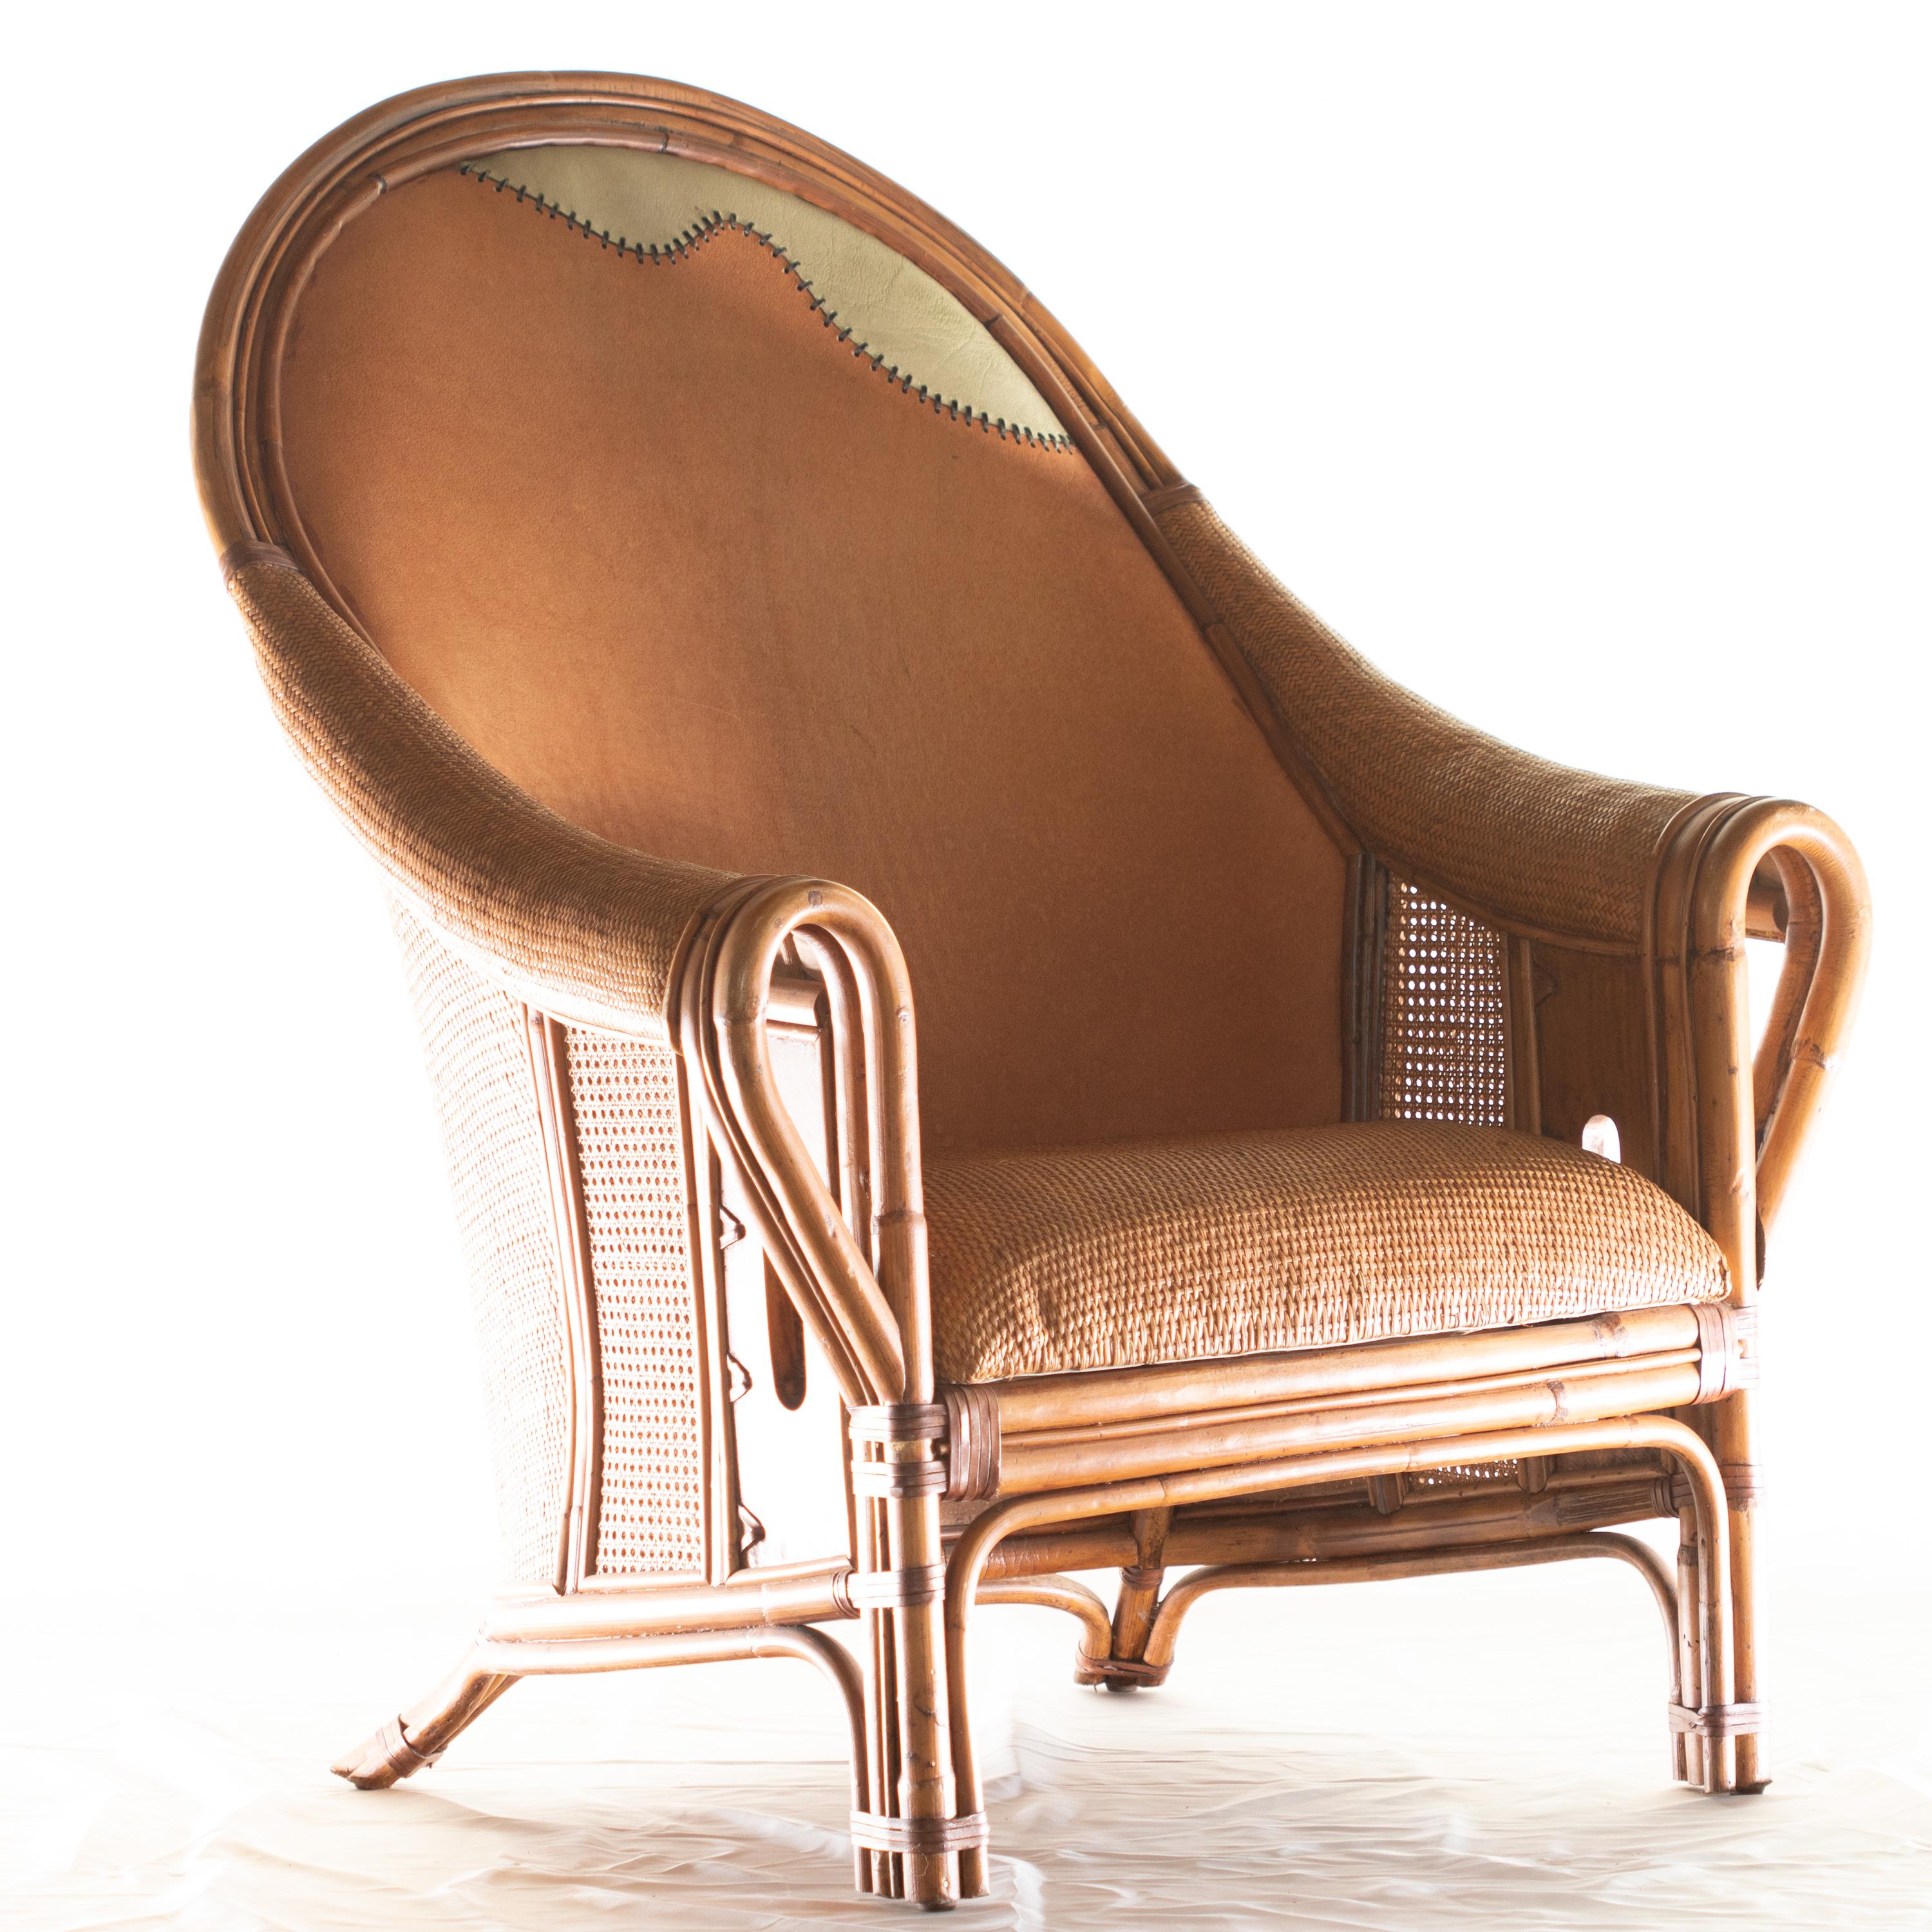 Modern armchair designed by Ramon Castellano (spanish designer), stamped for Kalma in Bamboo Wood, 20th Century. Collapsible rattan base reinforced with wrought iron. Seat is framed in rattan and crown is in wood. Bindings in leather. Upholstered in